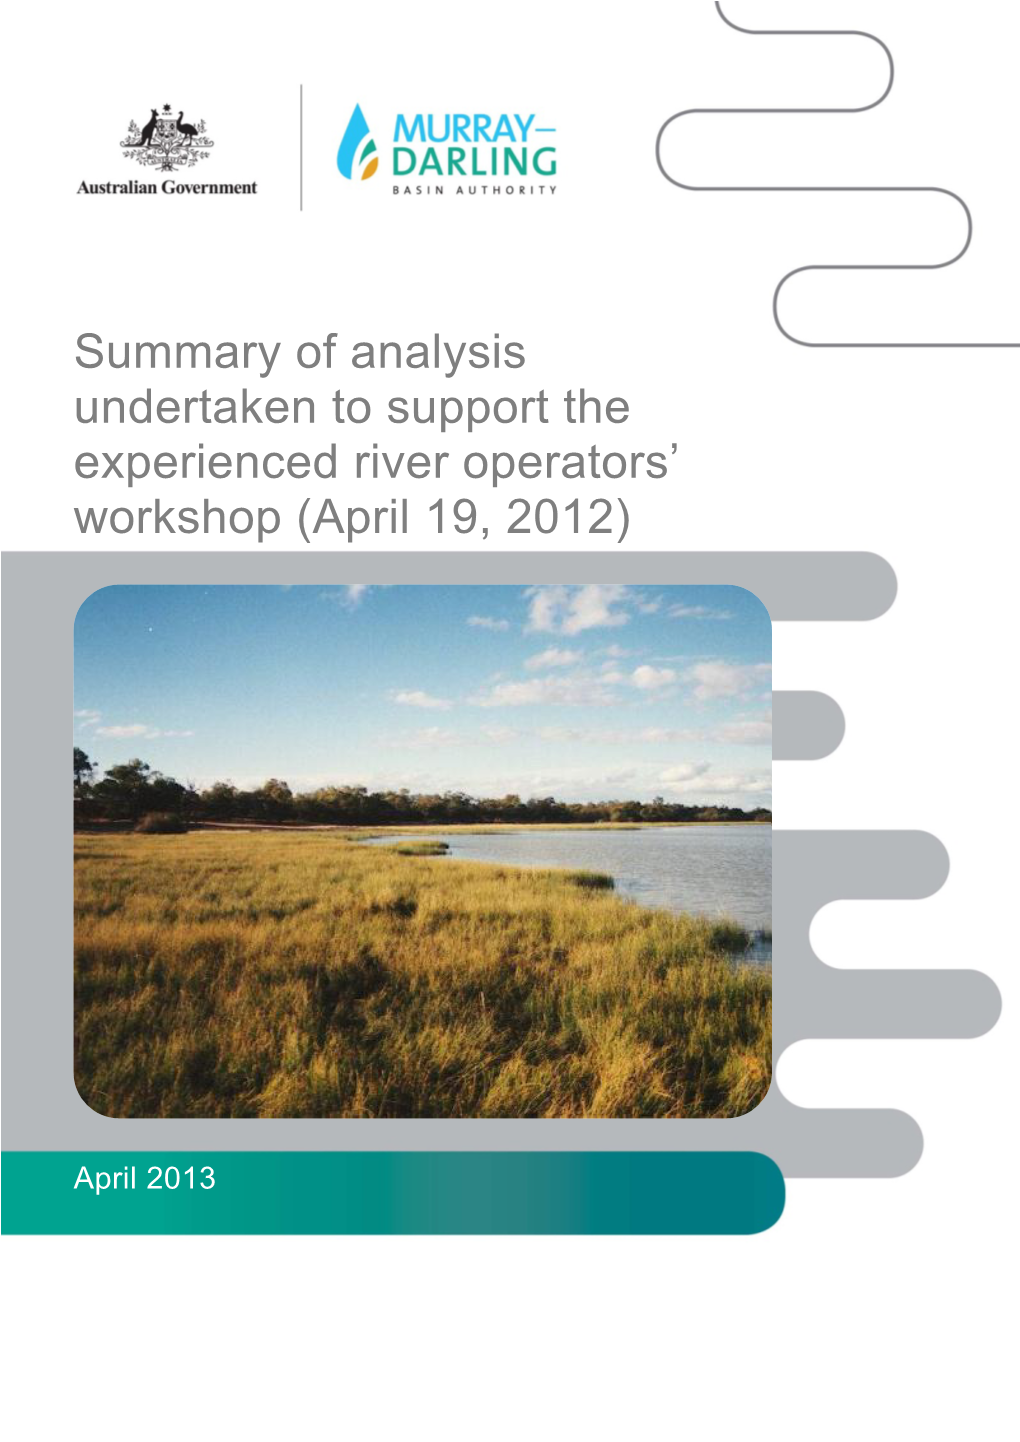 Summary of Analysis Undertaken to Support the Experienced River Operators’ Workshop (April 19, 2012)